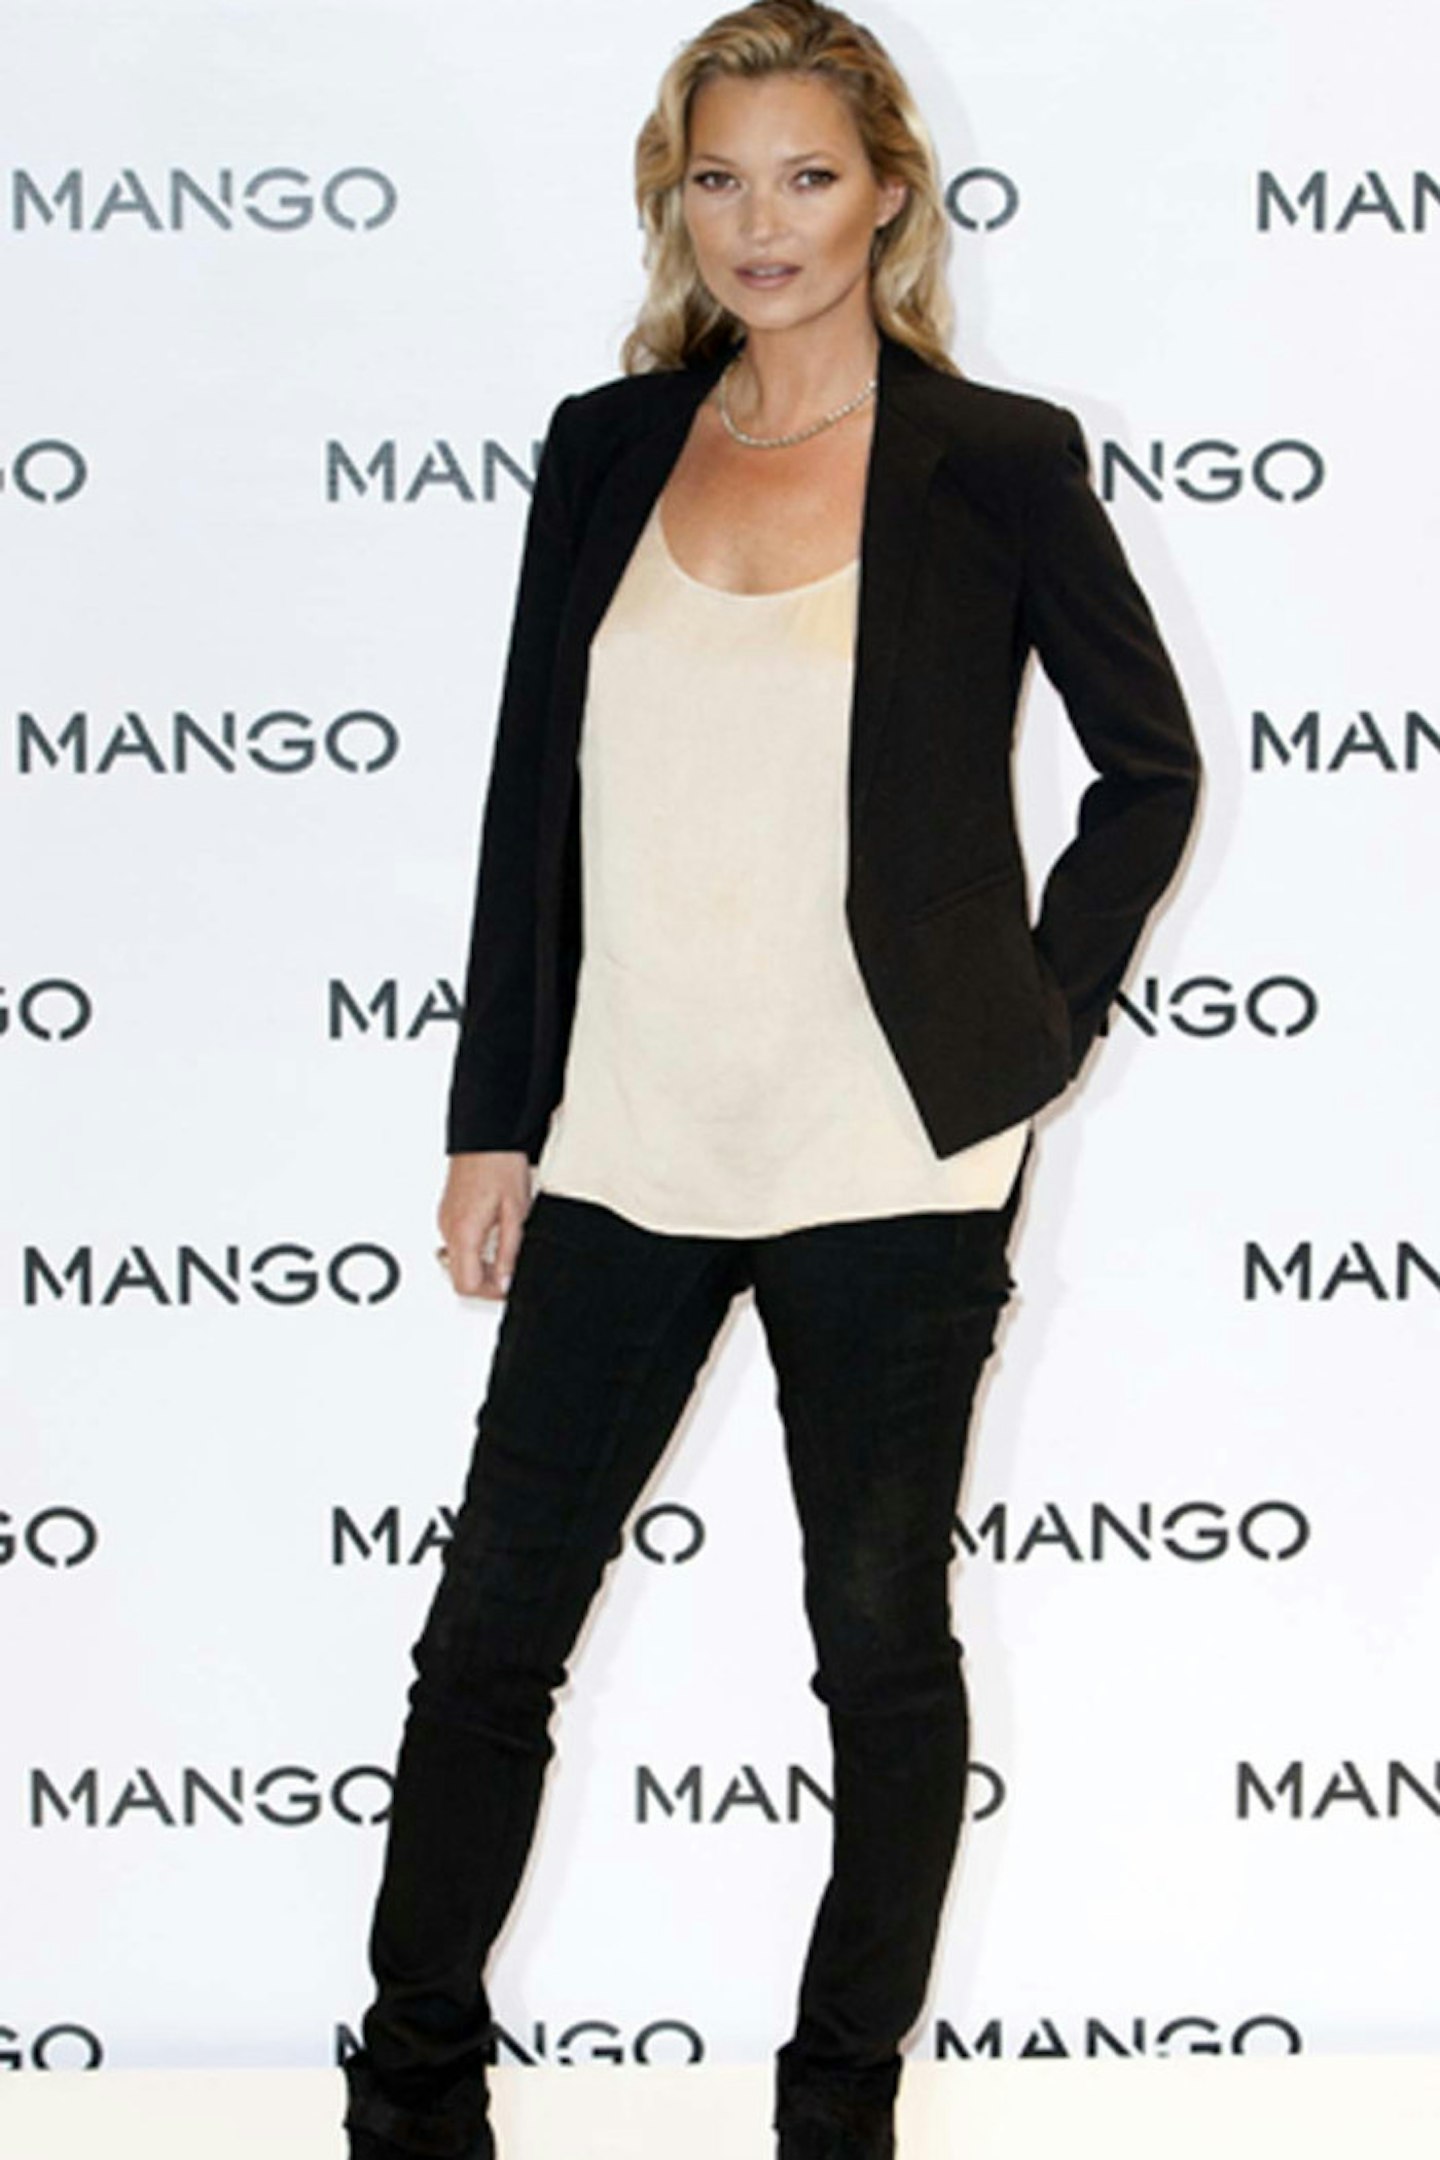 Kate Moss at the announcement of her Mango campaign, January 2012